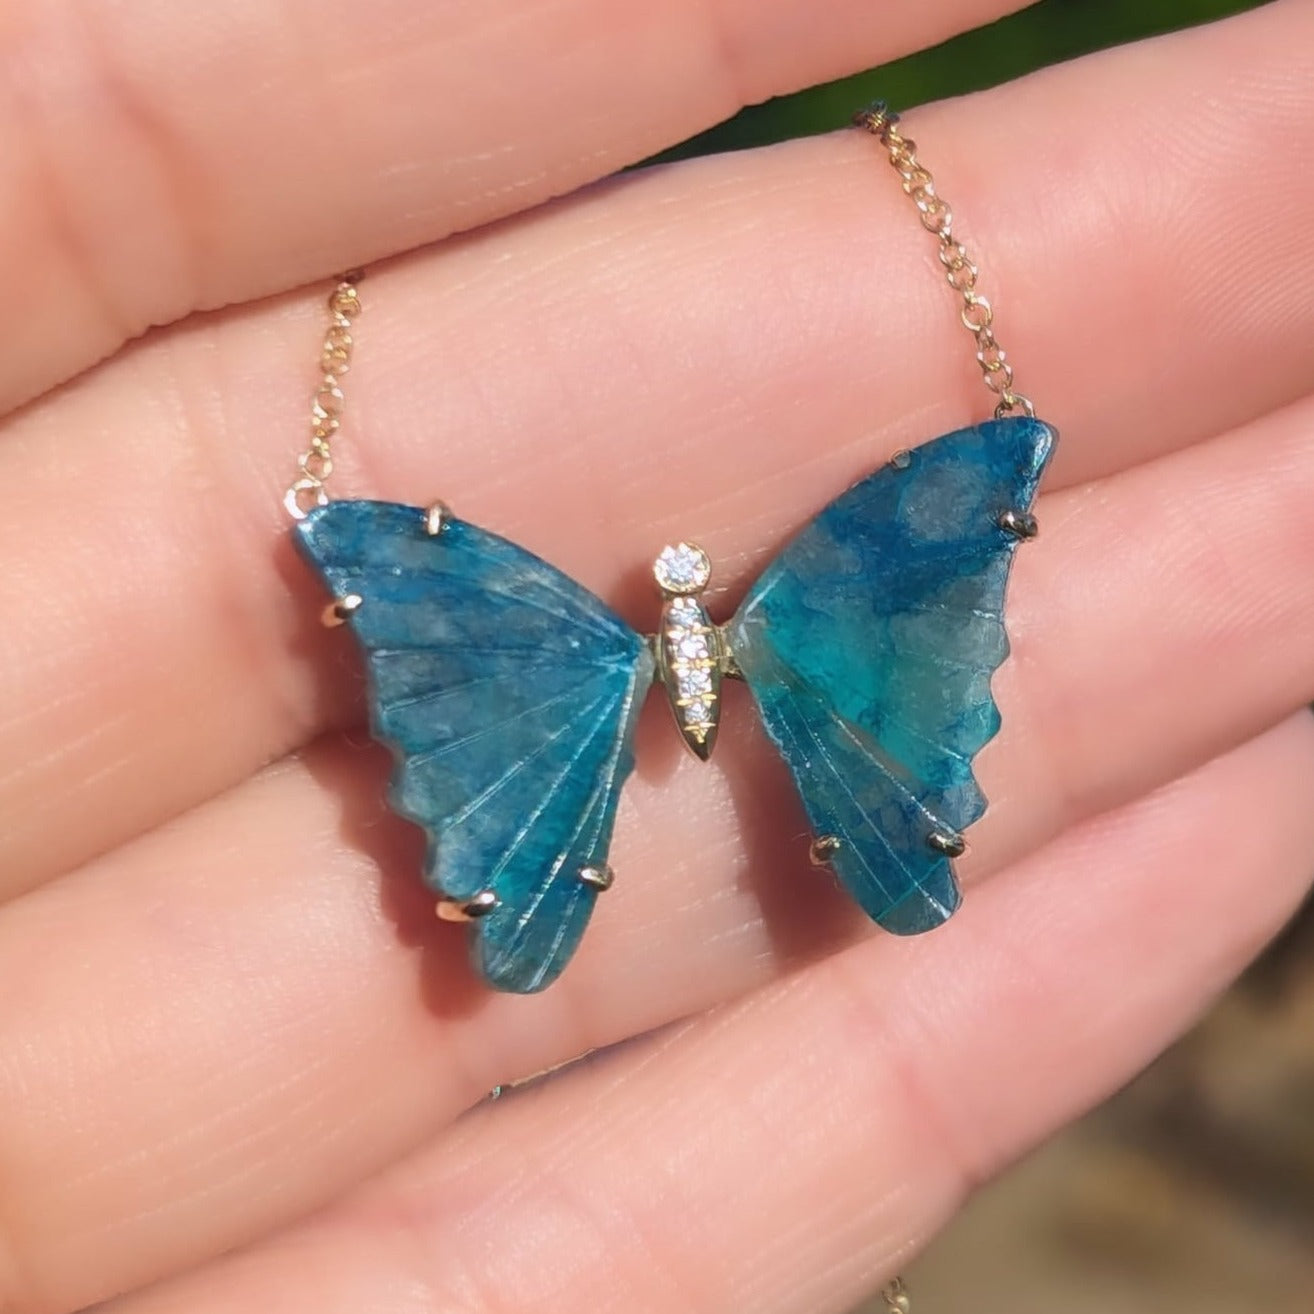 Chrysocolla Butterfly Necklace with Prongs